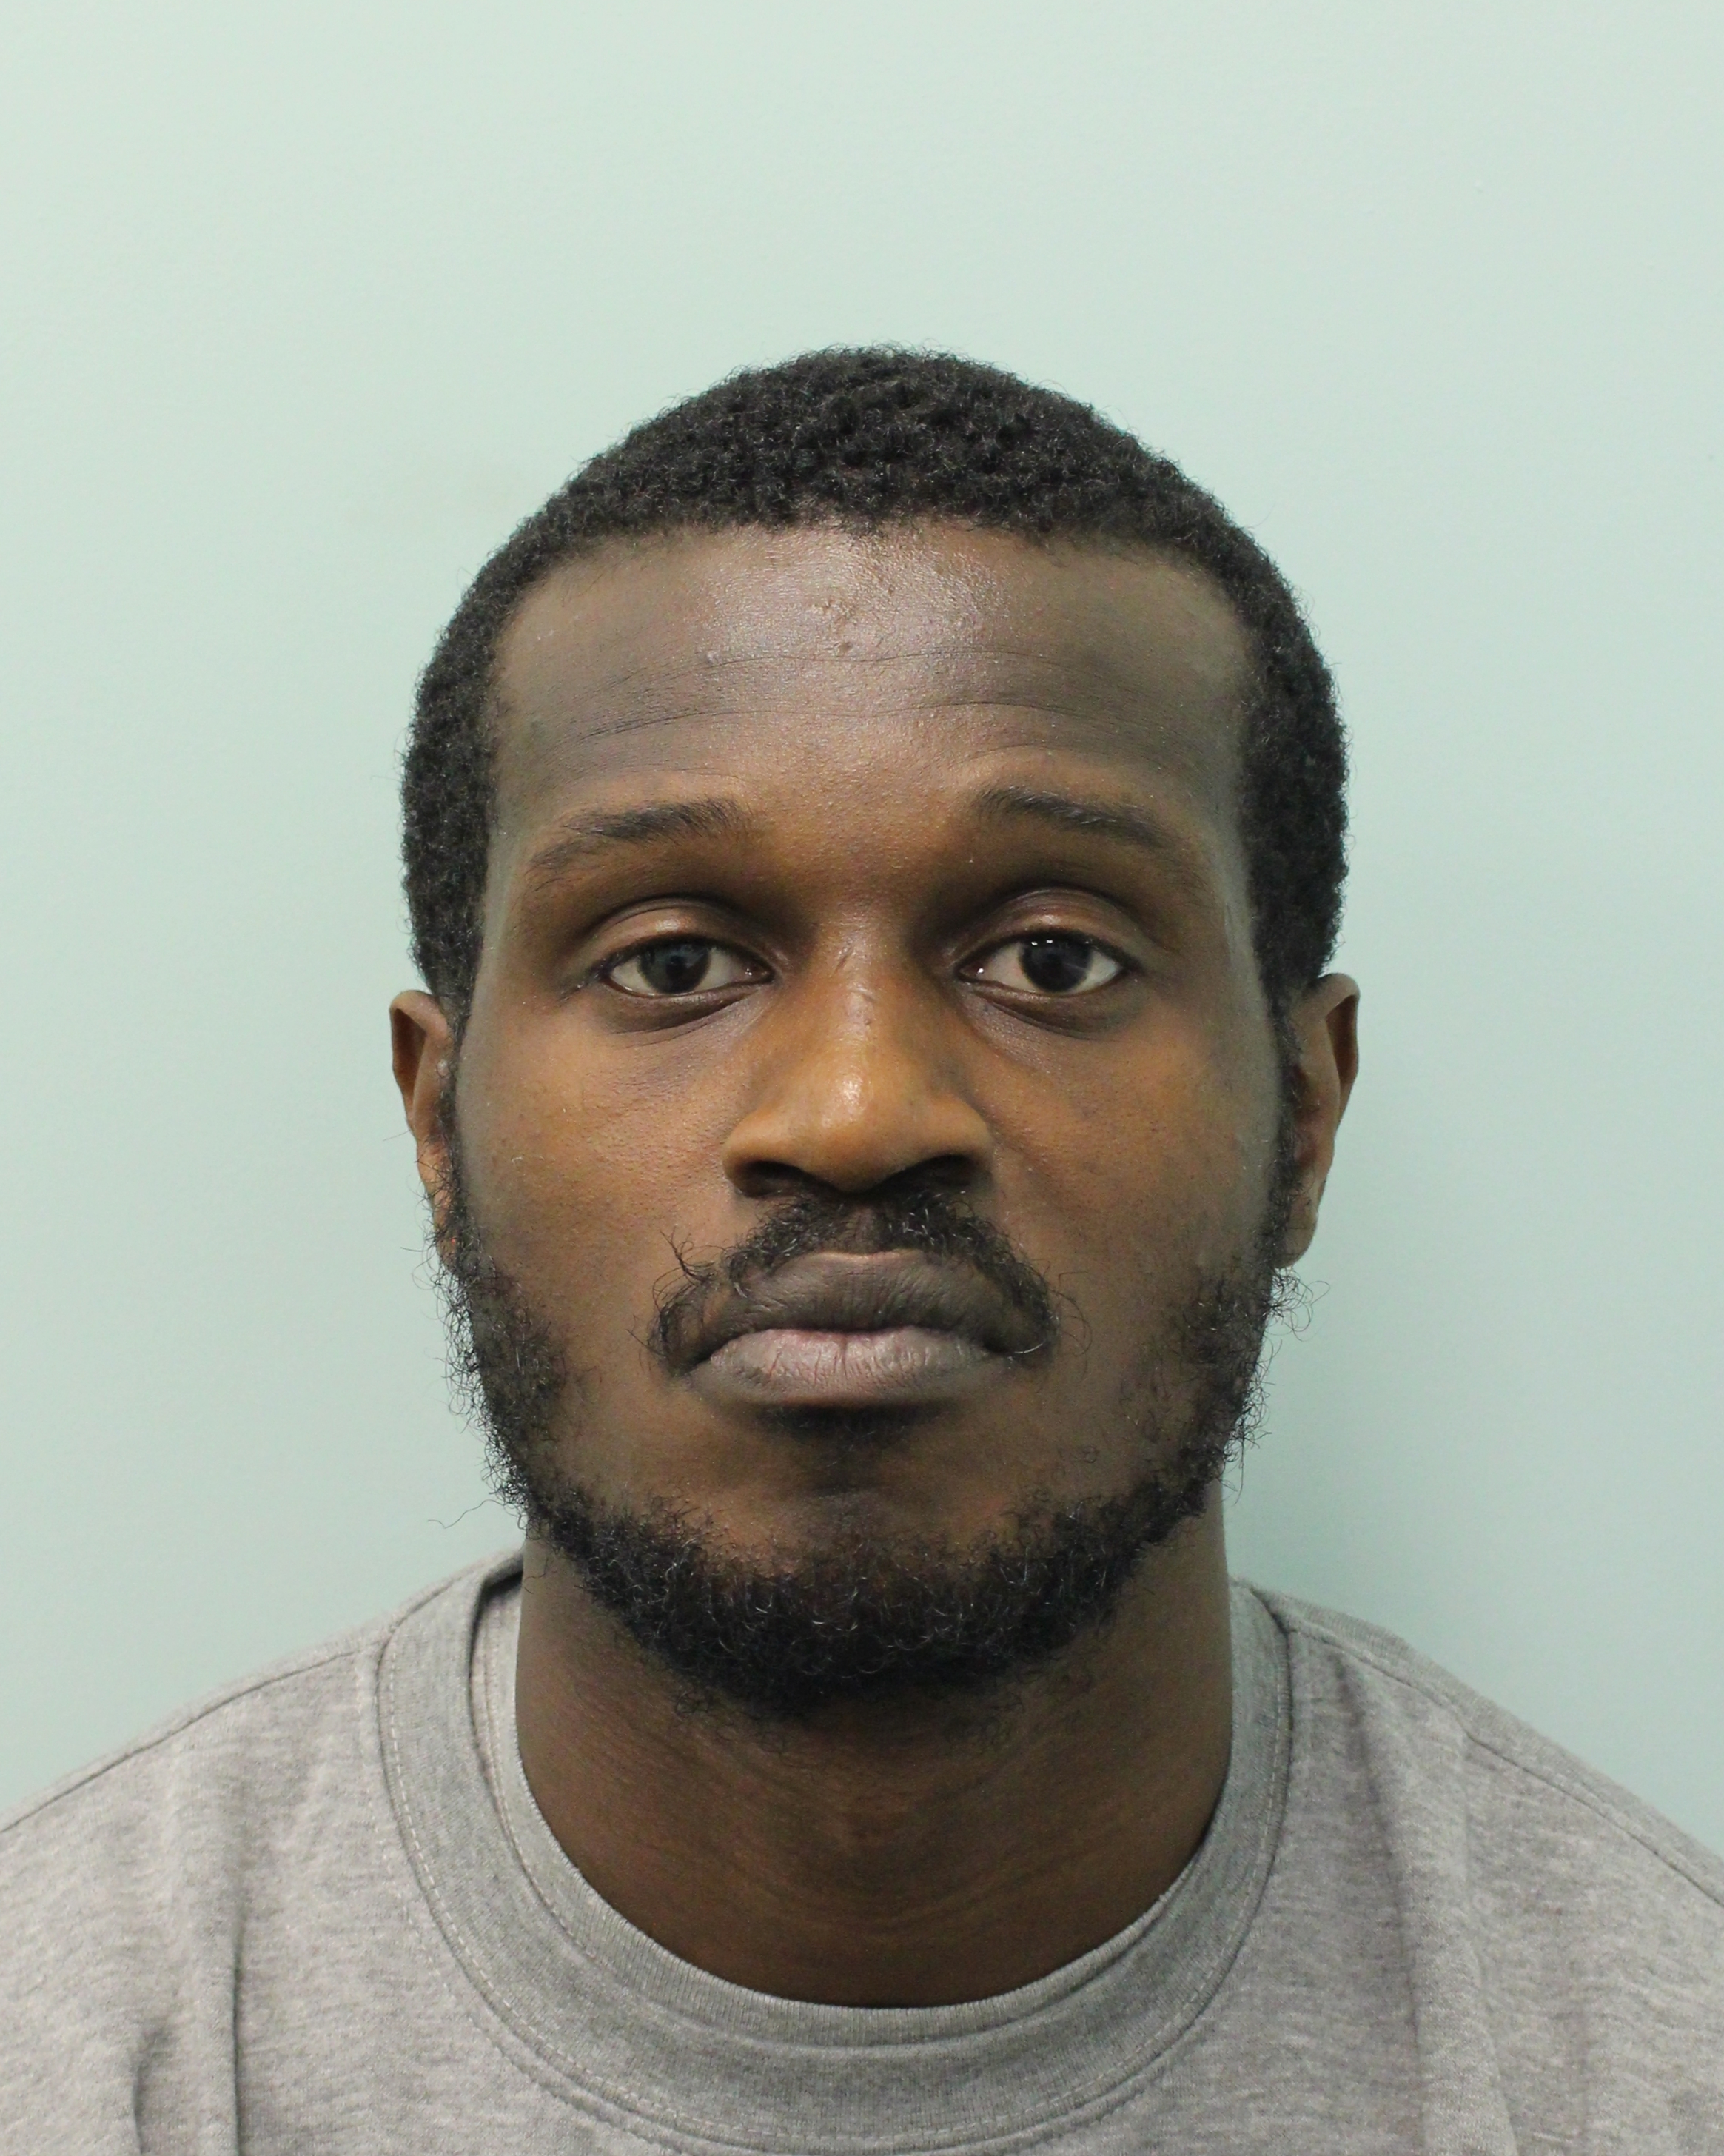 Ahmed Sesay, one of the suspects. Credit: Met Police